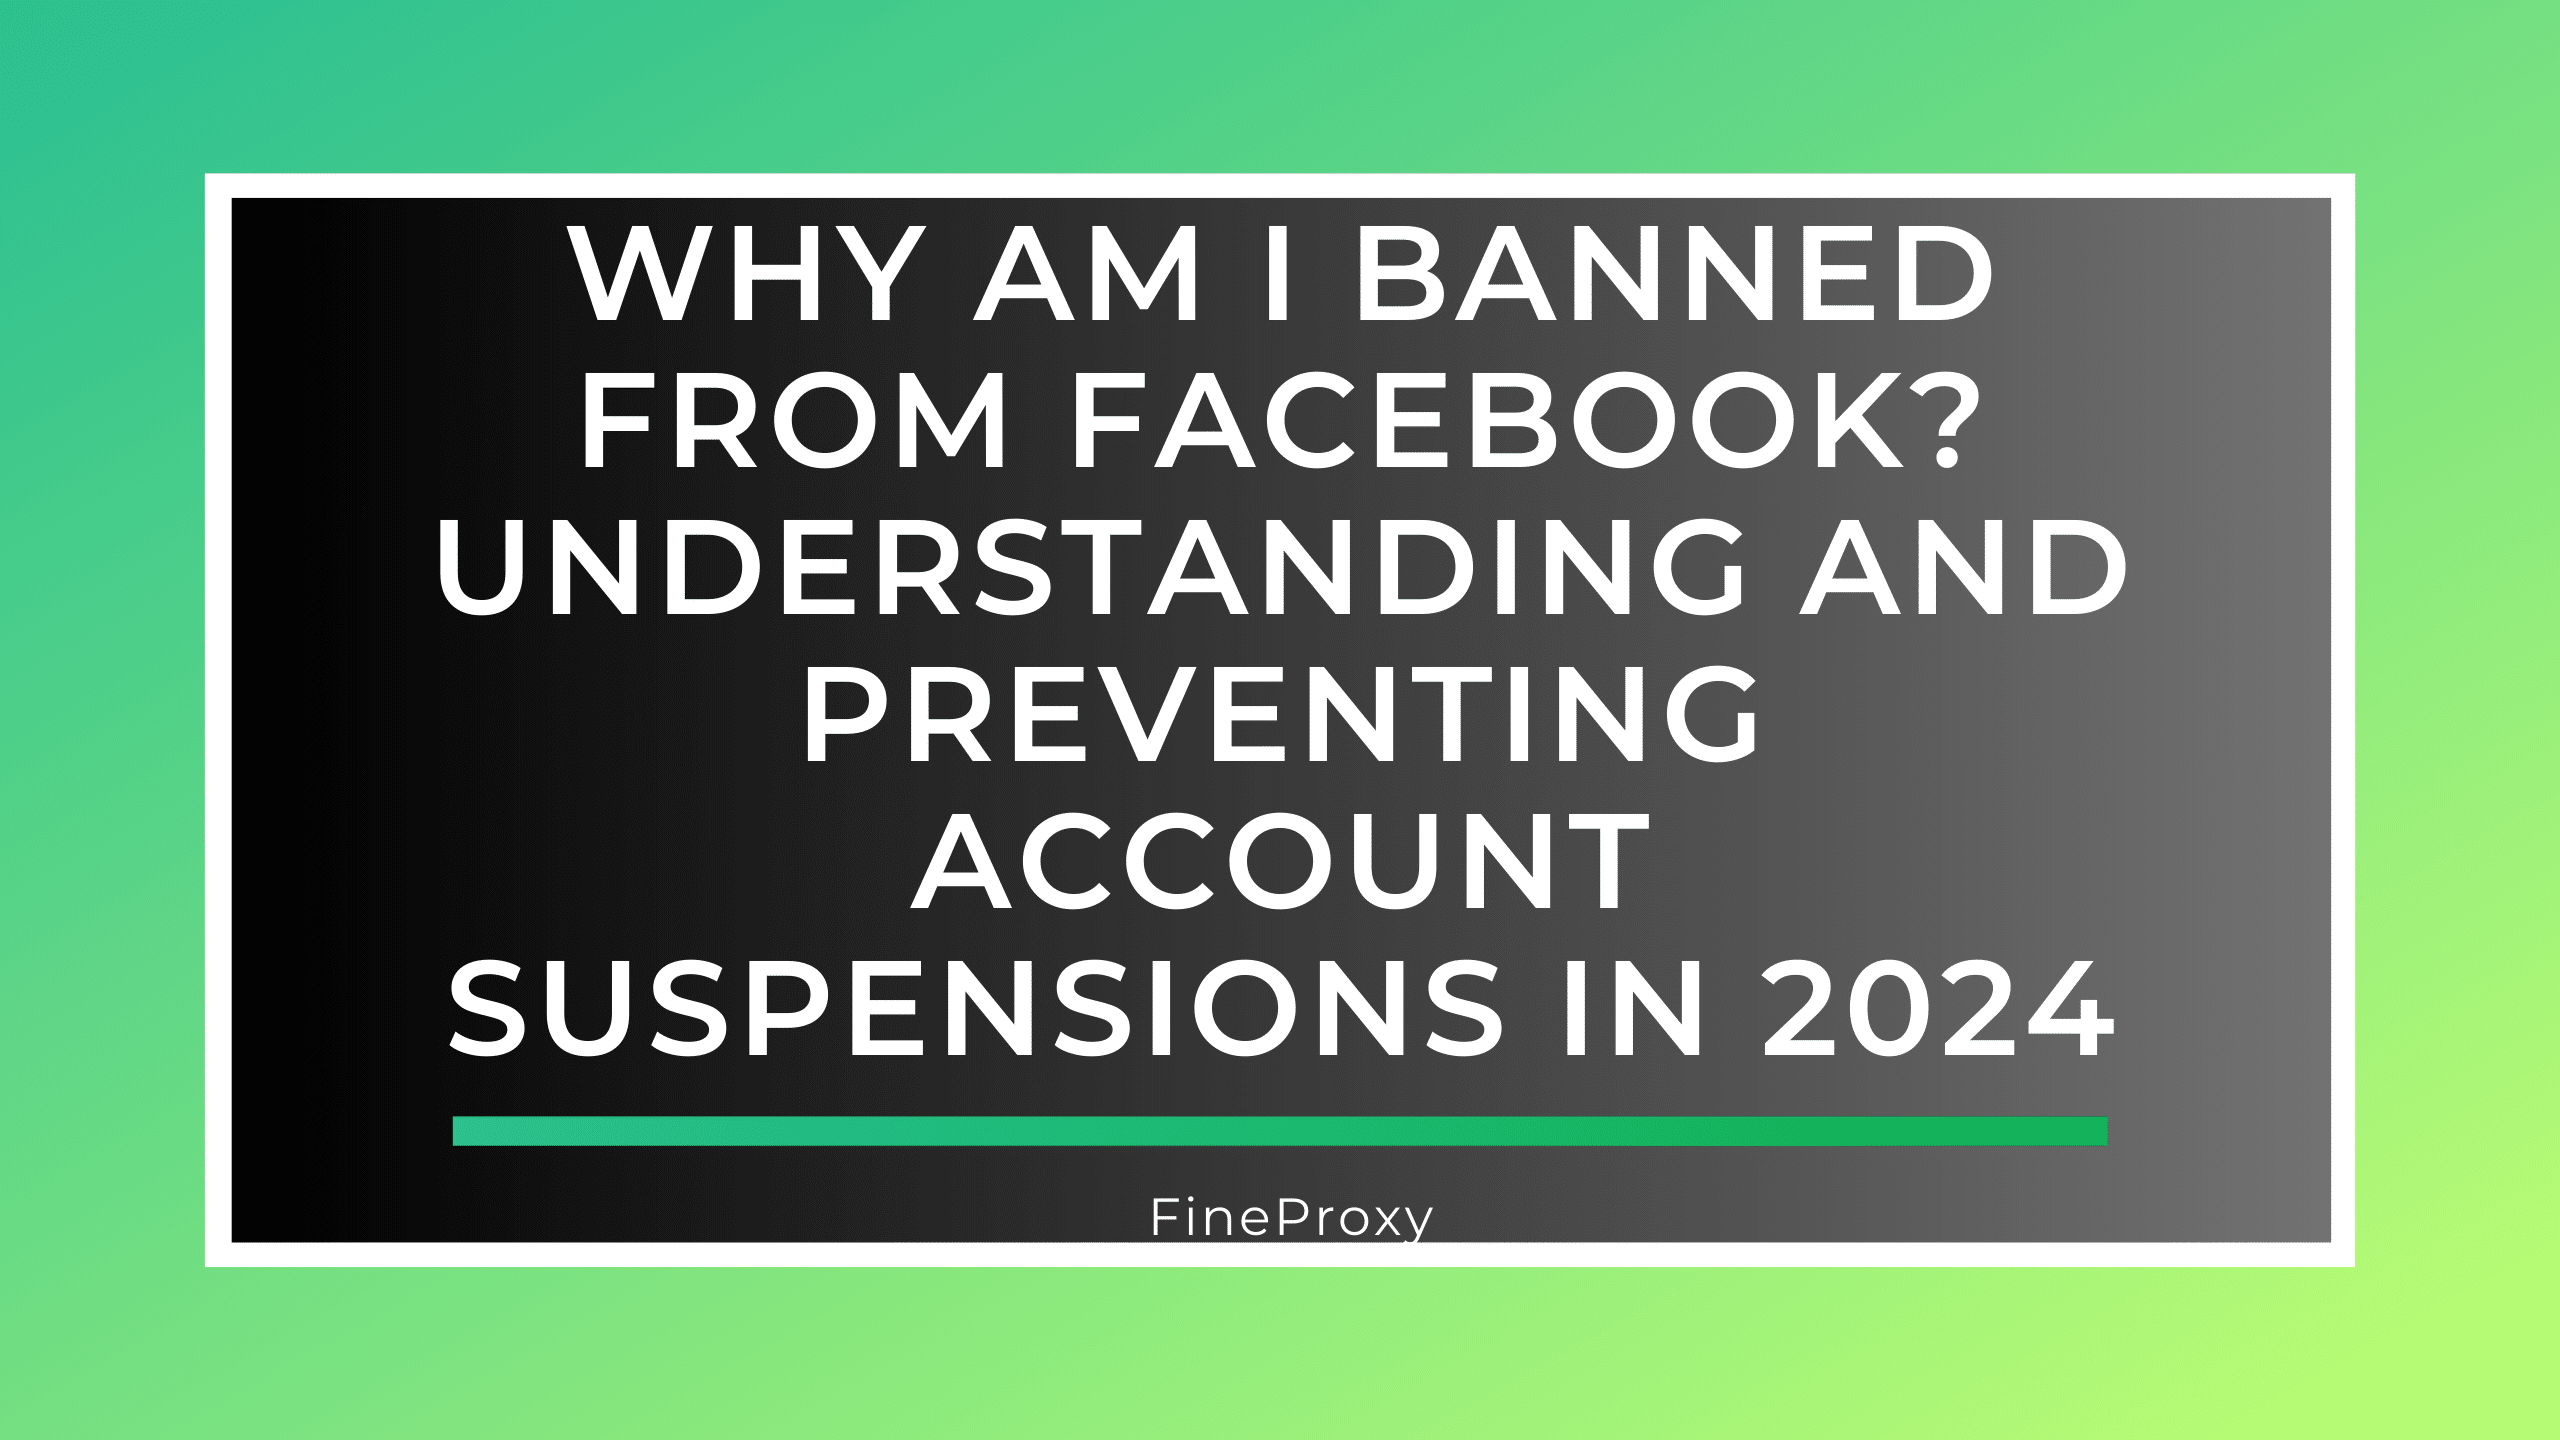 Why Am I Banned from Facebook? Understanding and Preventing Account Suspensions in 2024